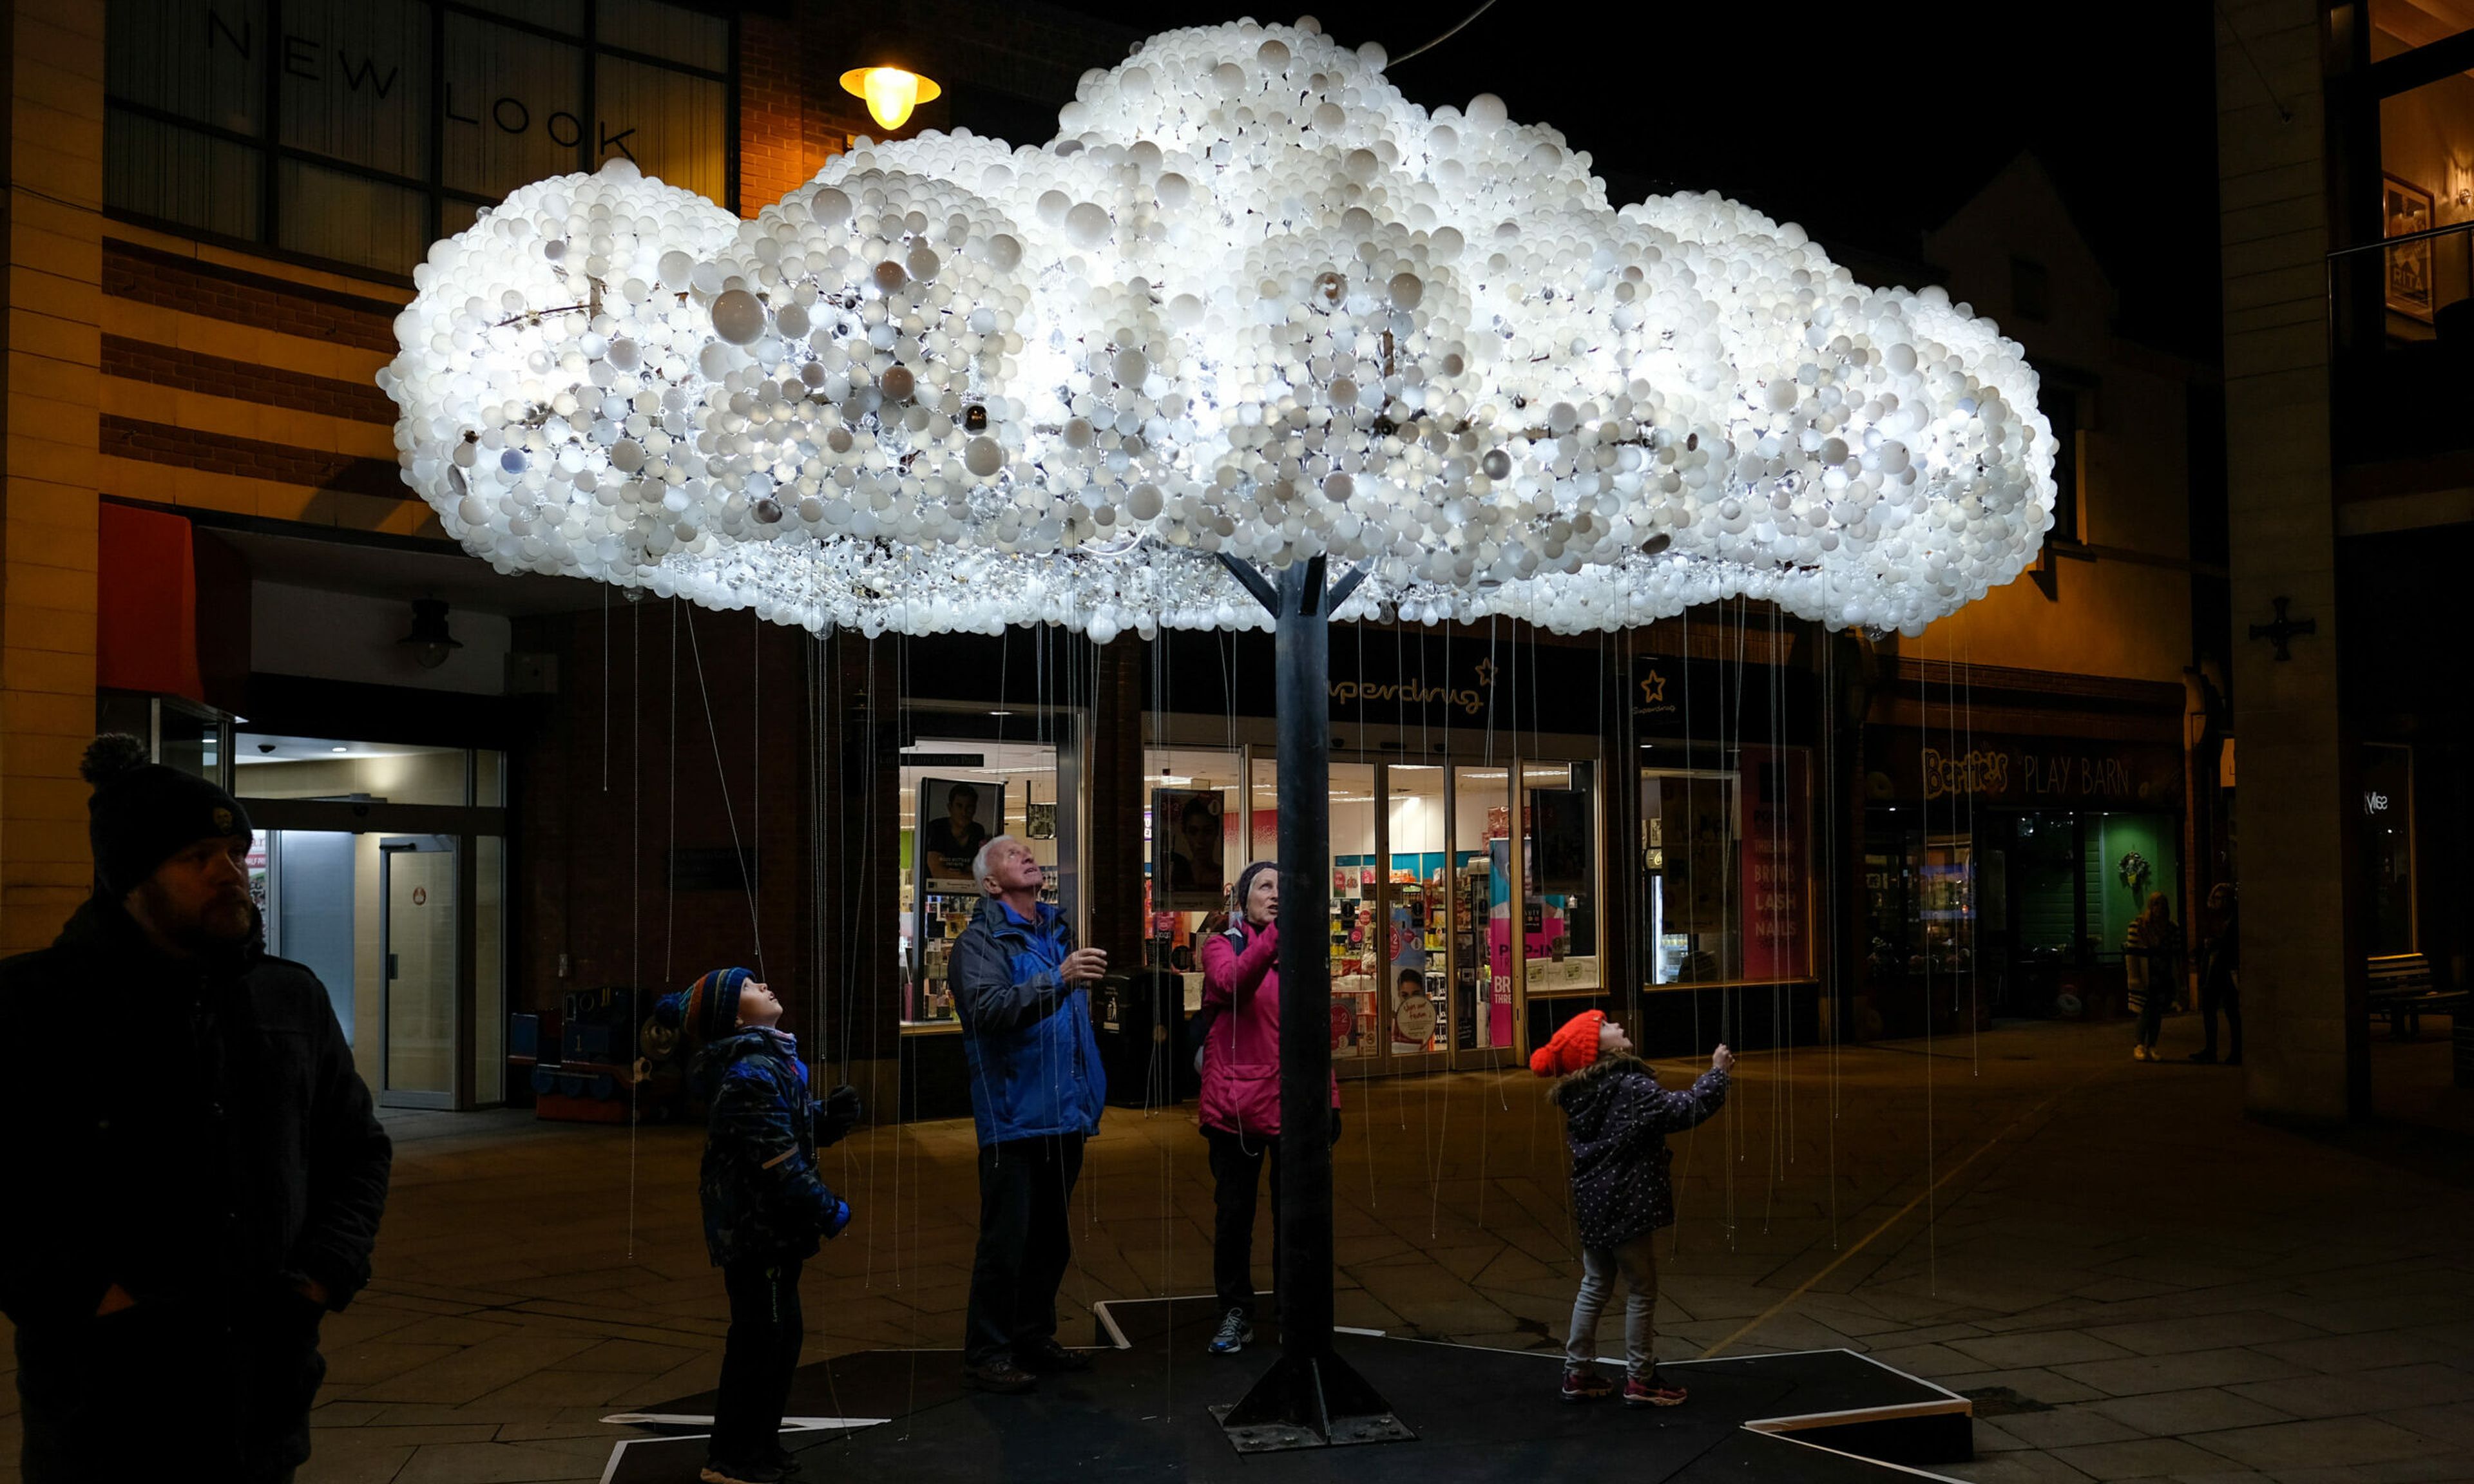 Seen here, a light artwork called Cloud at a light festival in Durham, England. (Photo by Ian Forsyth/Getty Images)